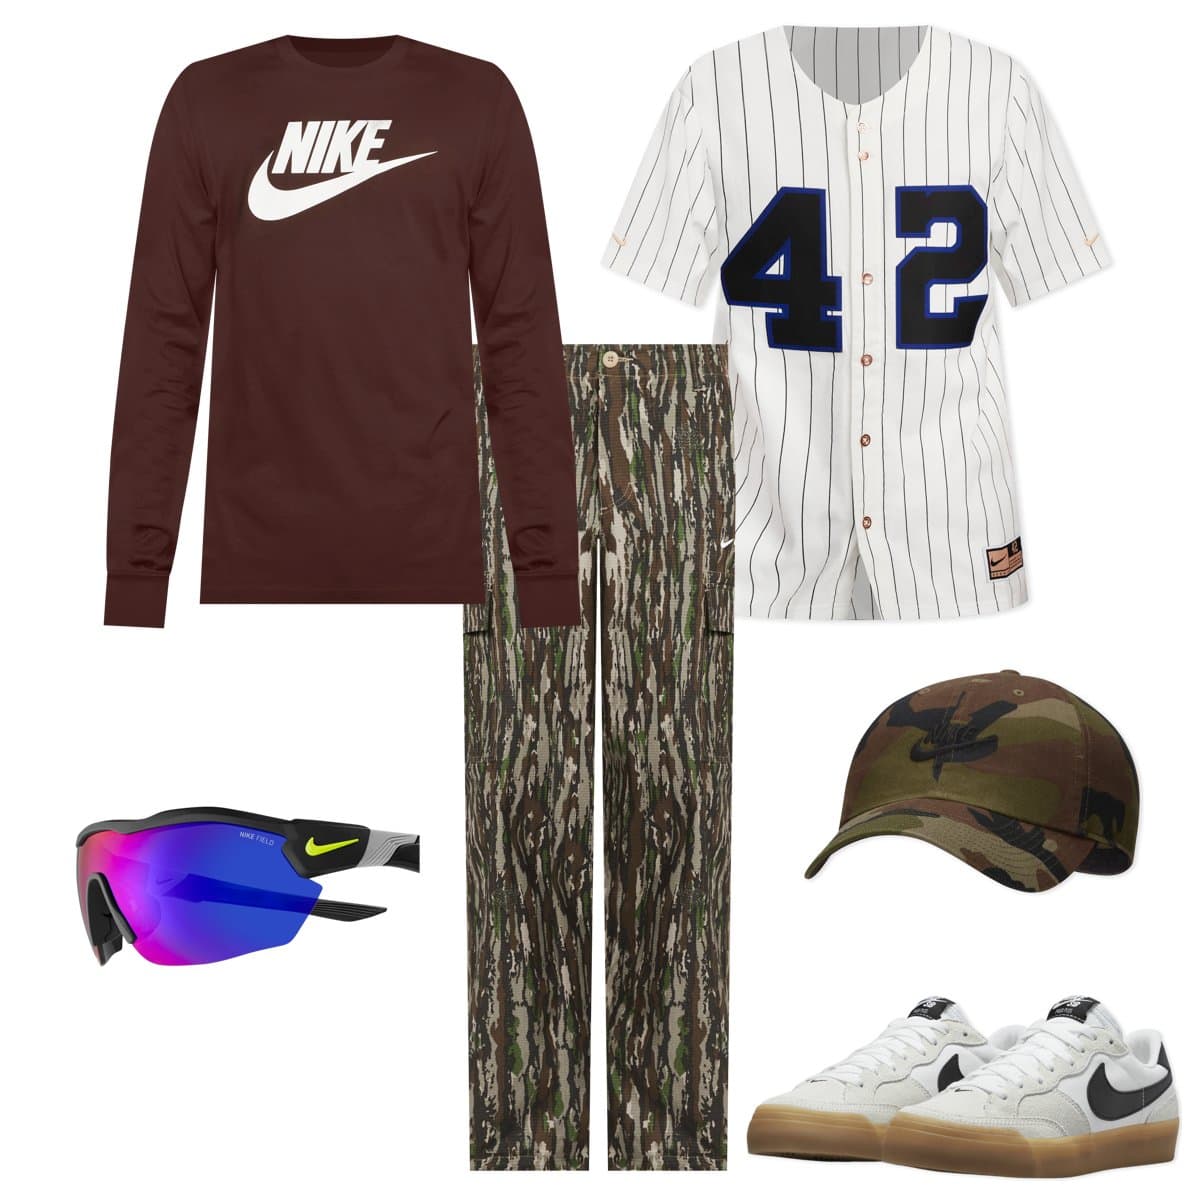 cold weather baseball game outfit